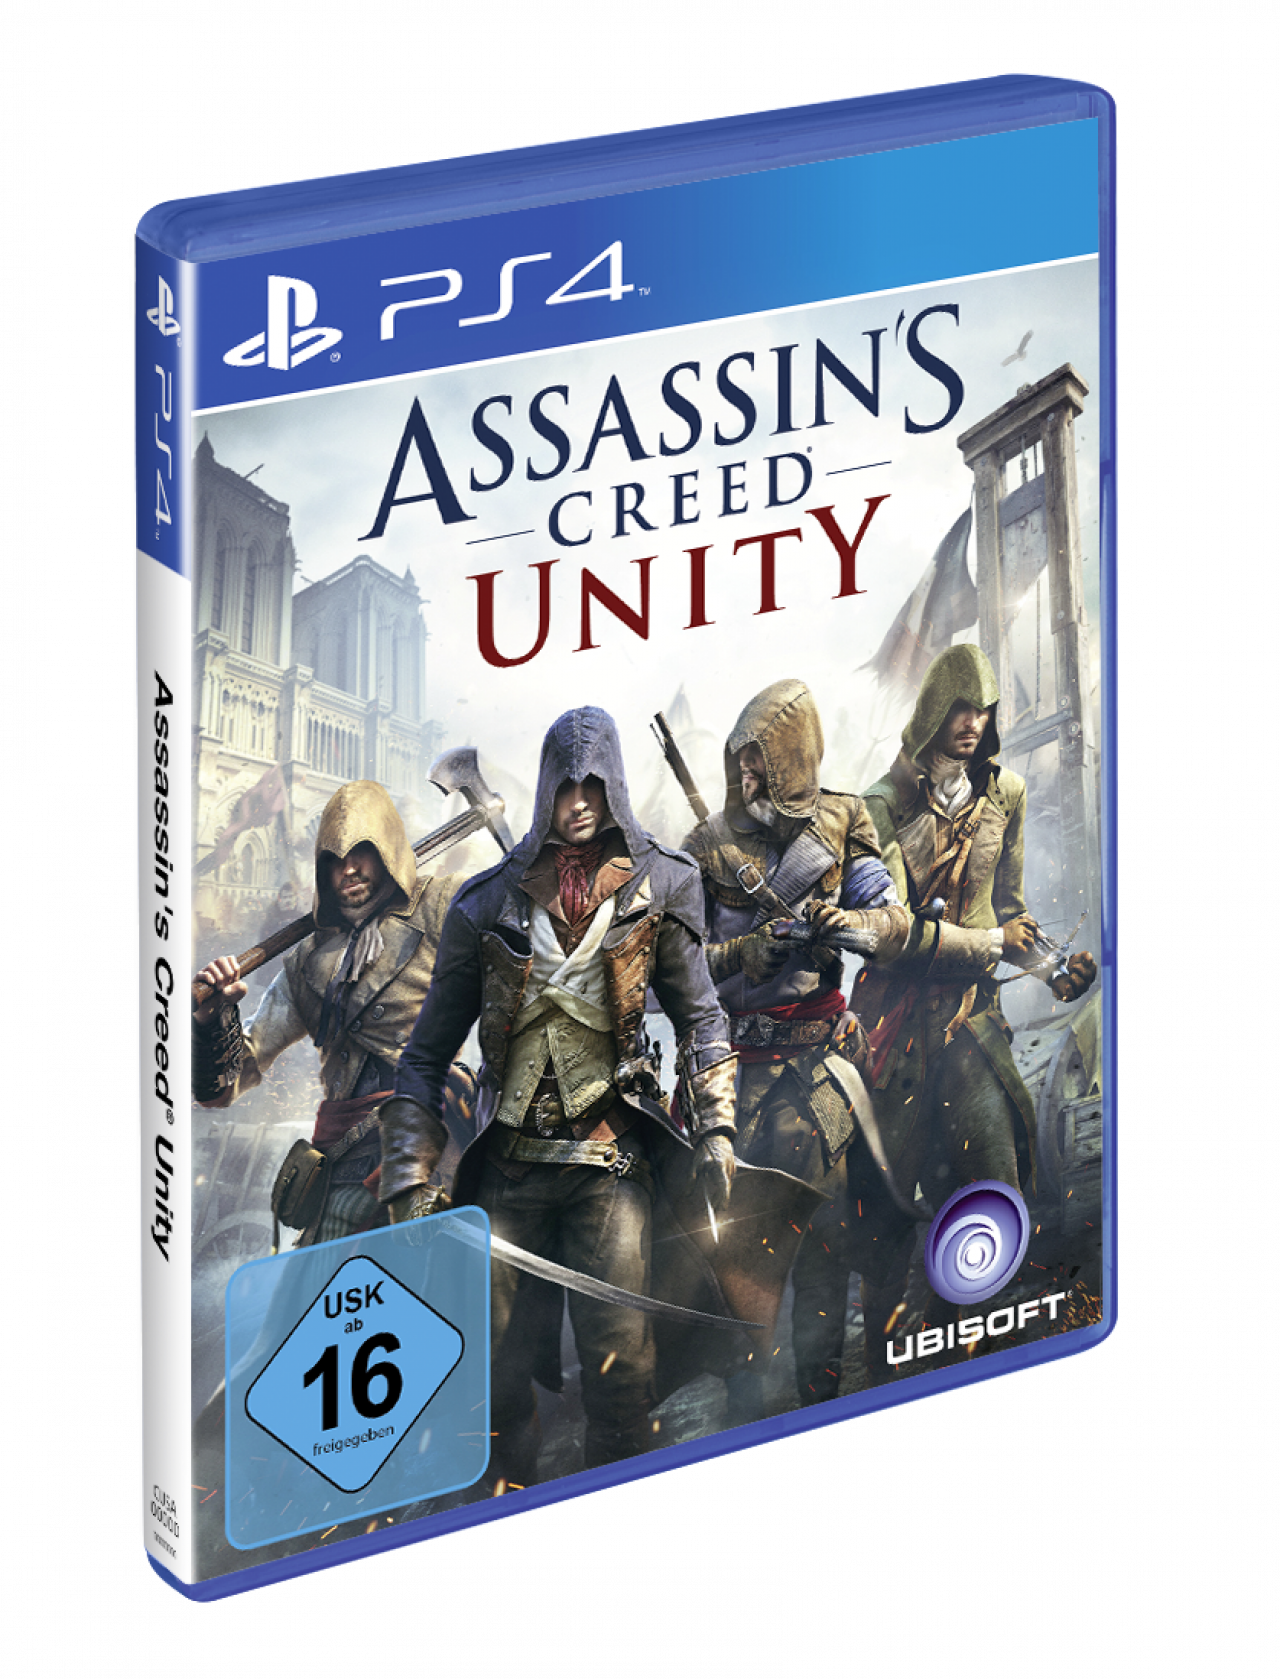 Creed игра ps4. Assassin's Creed единство ps4. Ассасин Крид диск на ПС 4. Assassin's Creed: единство PS 3. Диска ассасин Крид Юнити на ПС 4.